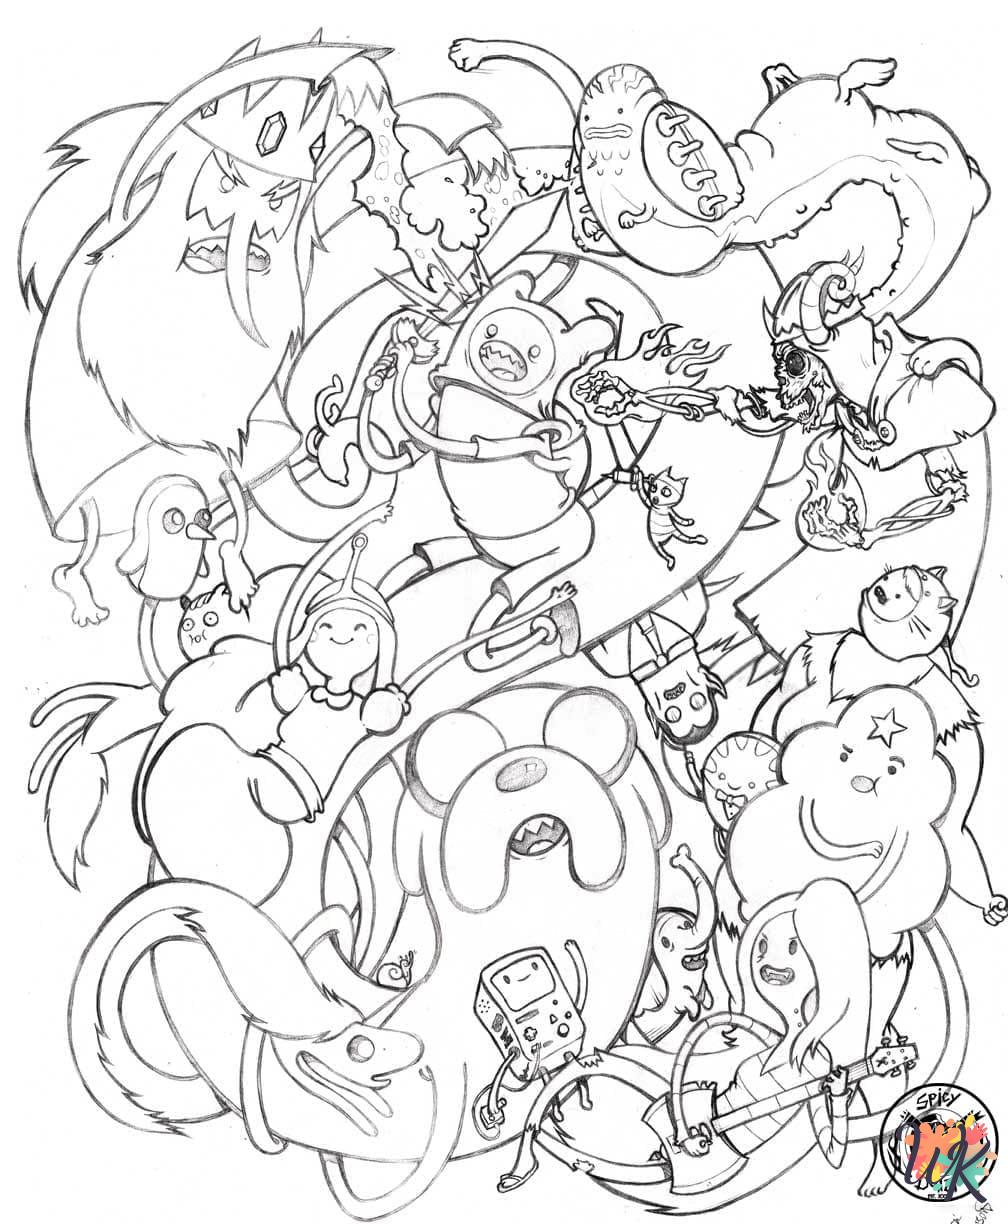 Adventure Time coloring pages for adults easy